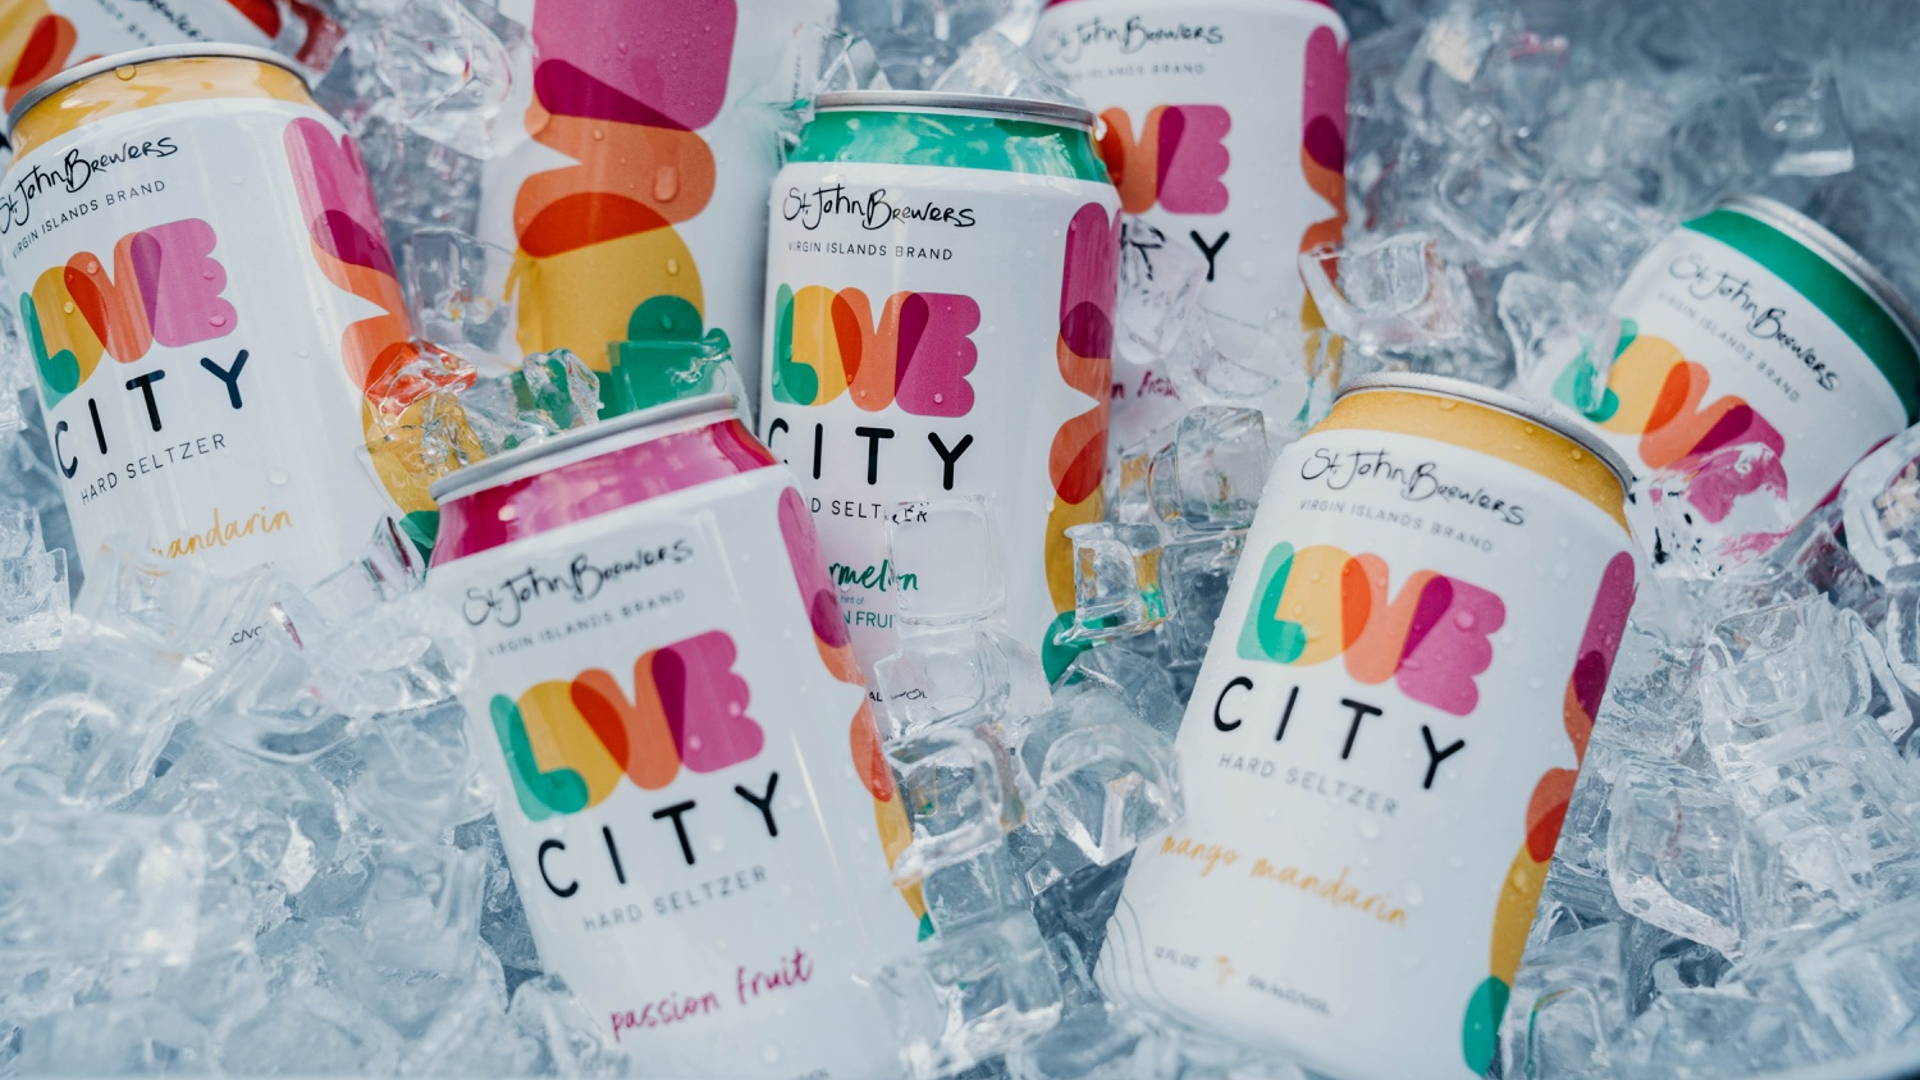 Featured image for Love City Premium Hard Seltzer Delivers A Tropical Kind Of Tipsy